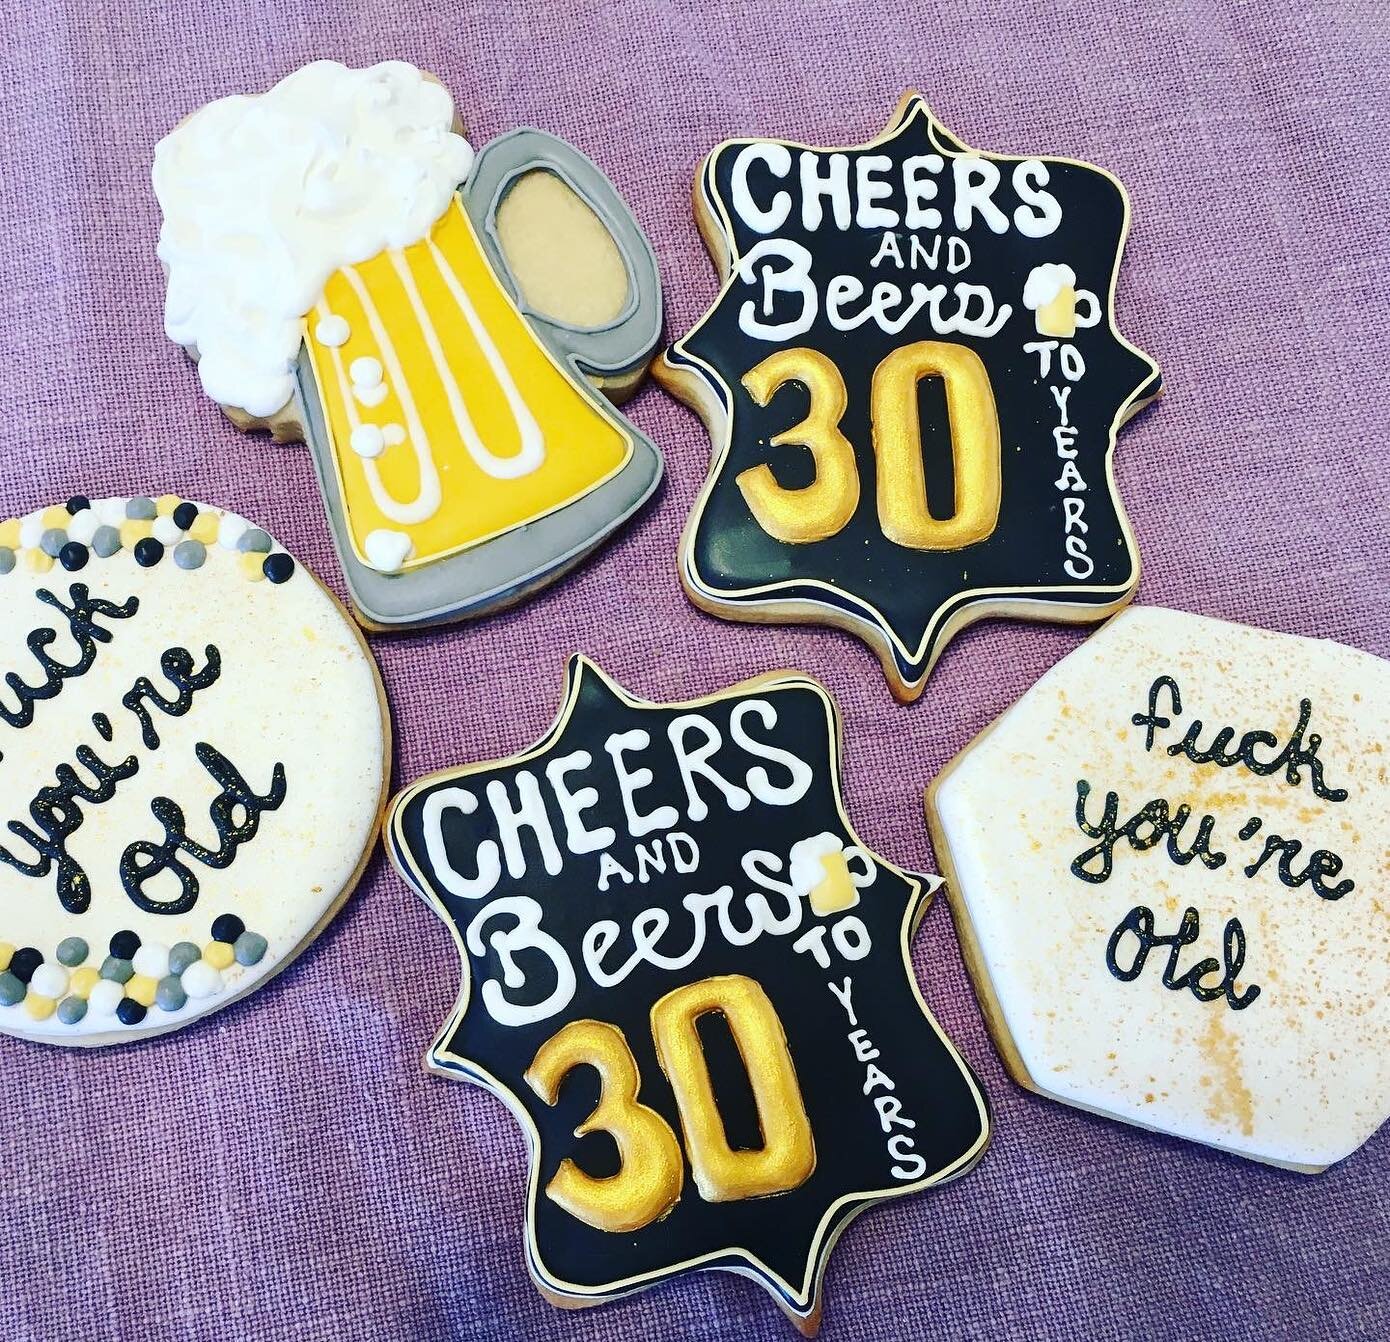 ⚠️ Adult Humor Cookies ⚠️
Thank you to a customer who never ceases to make me laugh when she sends her reference pics and requests 🤣 There&rsquo;s truly a cookie for ALL of life&rsquo;s events! ✨💜
.
.
.
#cottagefoodbaker #royalicingcookies #cookiea